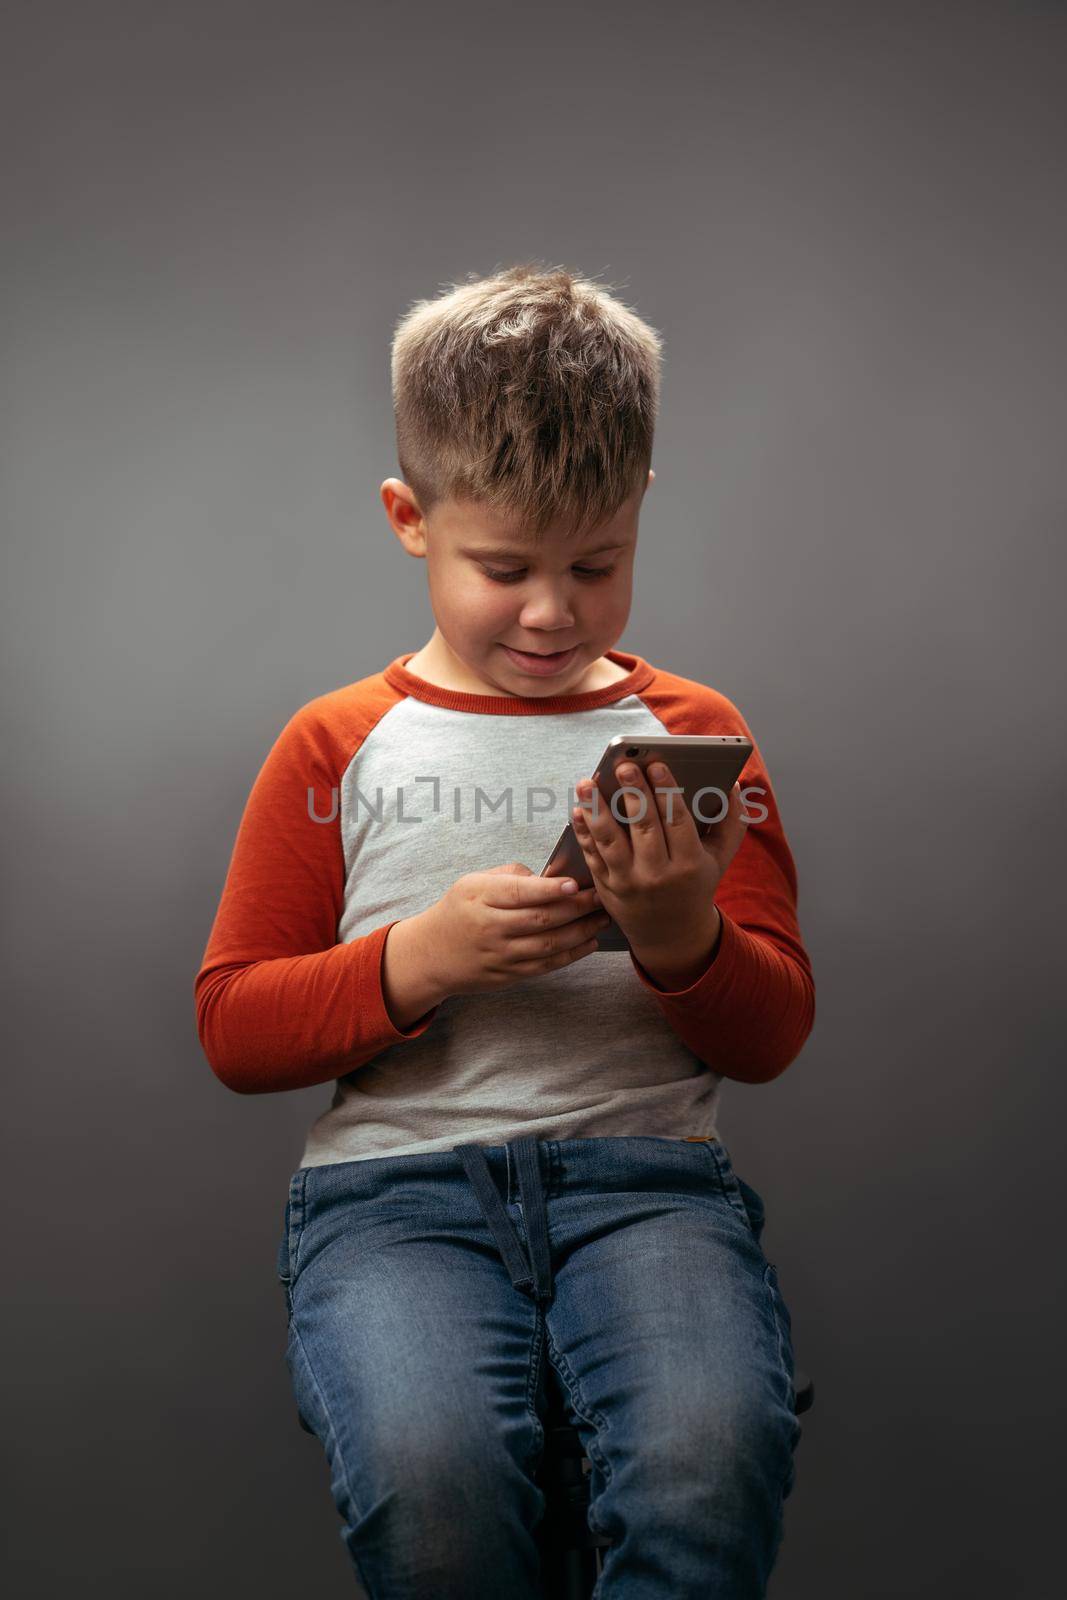 little boy in red shirt looking at the smartphone holding it in his hands and smile isolated on grey background. Human emotions, facial expression concept. Facial expressions, emotions, feelings.